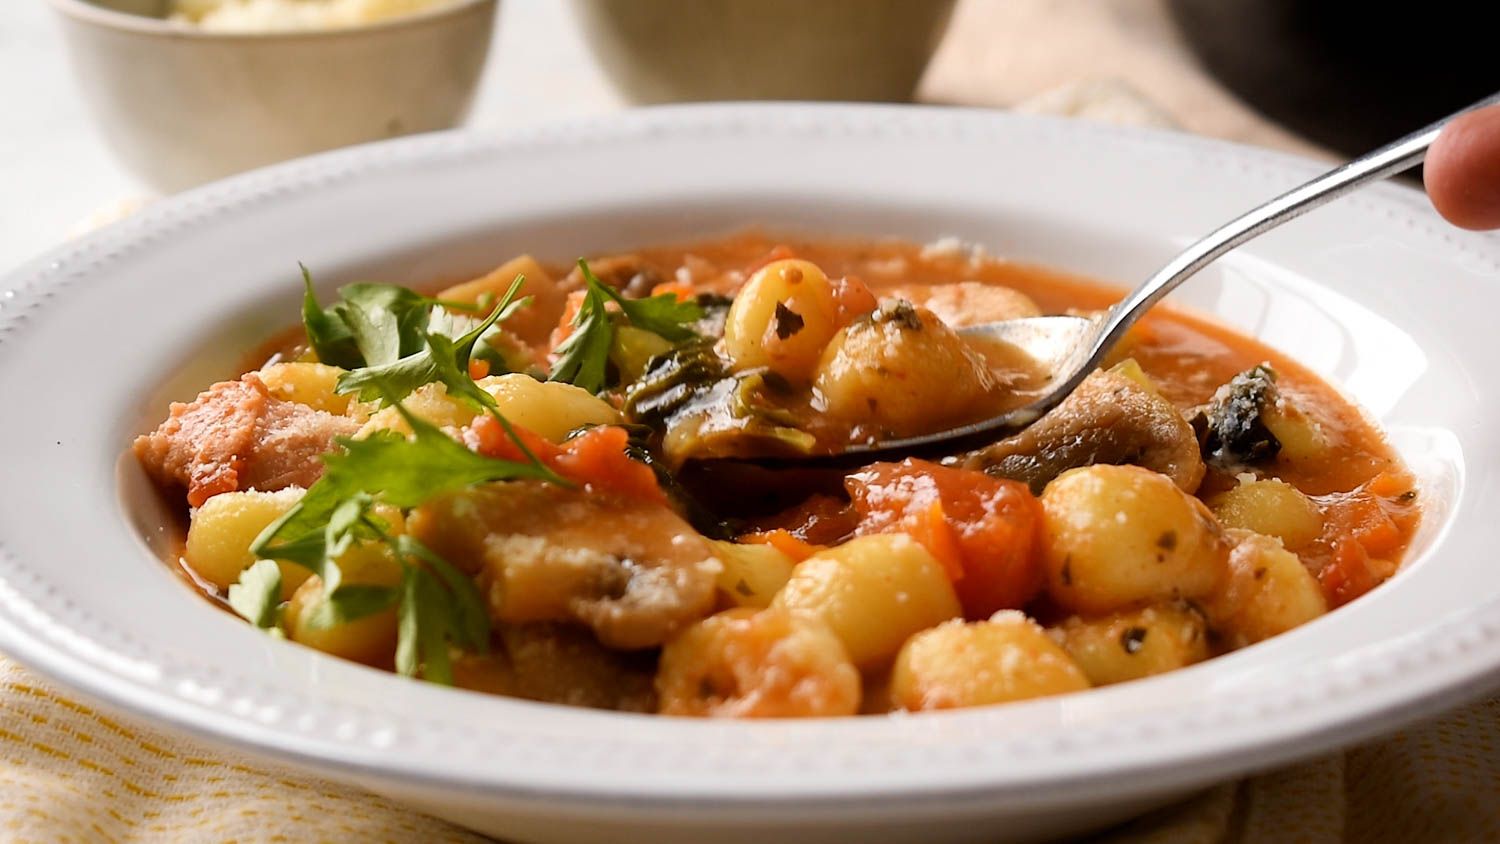 Chicken sausage and gnocchi soup in a bowl with mushrooms, tomatoes, potato gnocchi, and sausage.